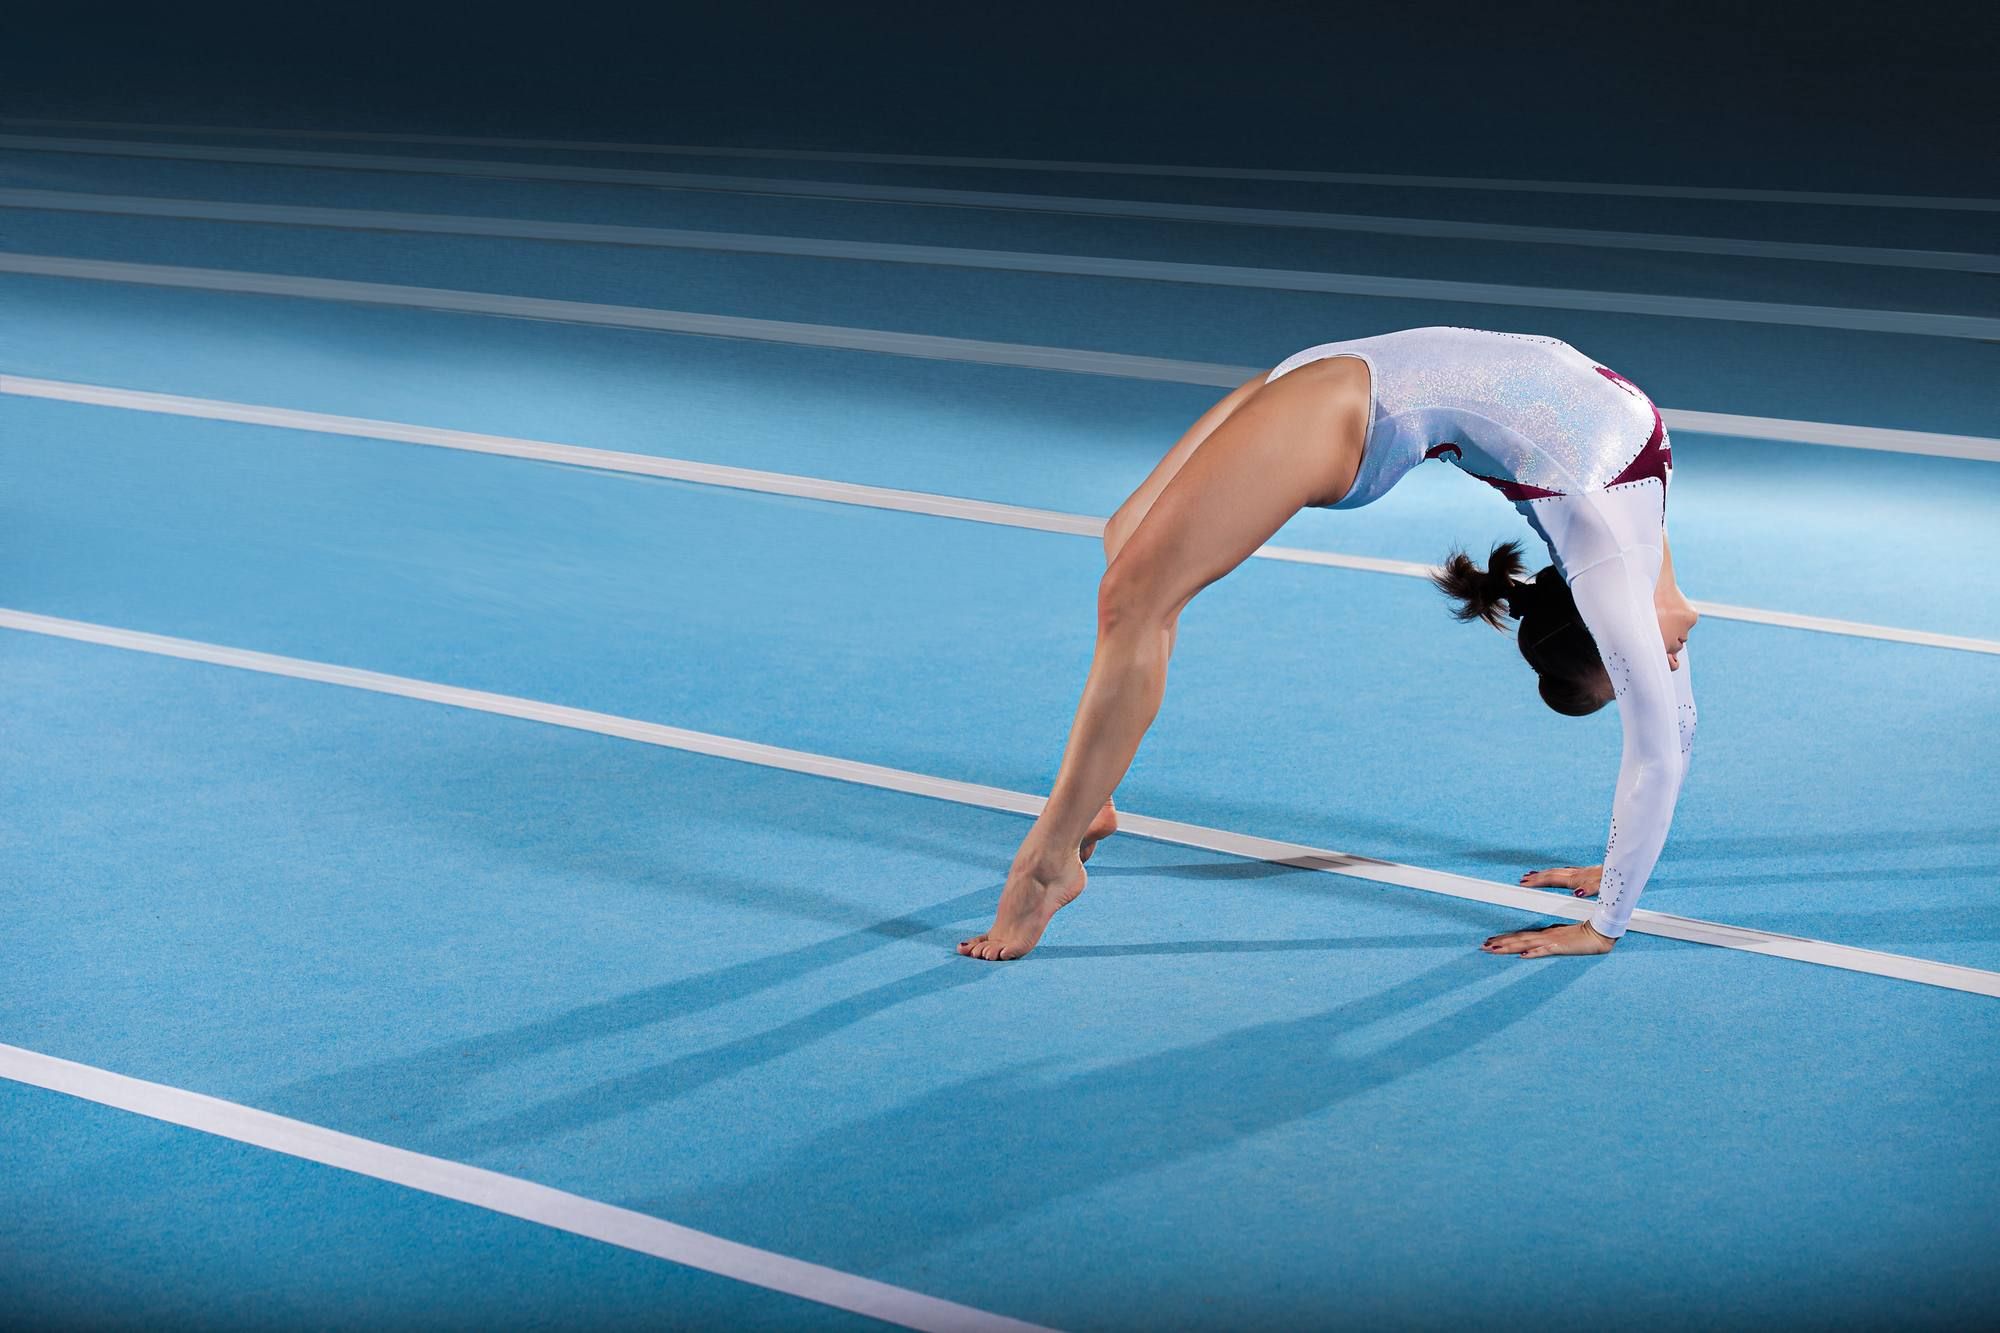 British Gymnastics is facing a group action claim alleging abuse.